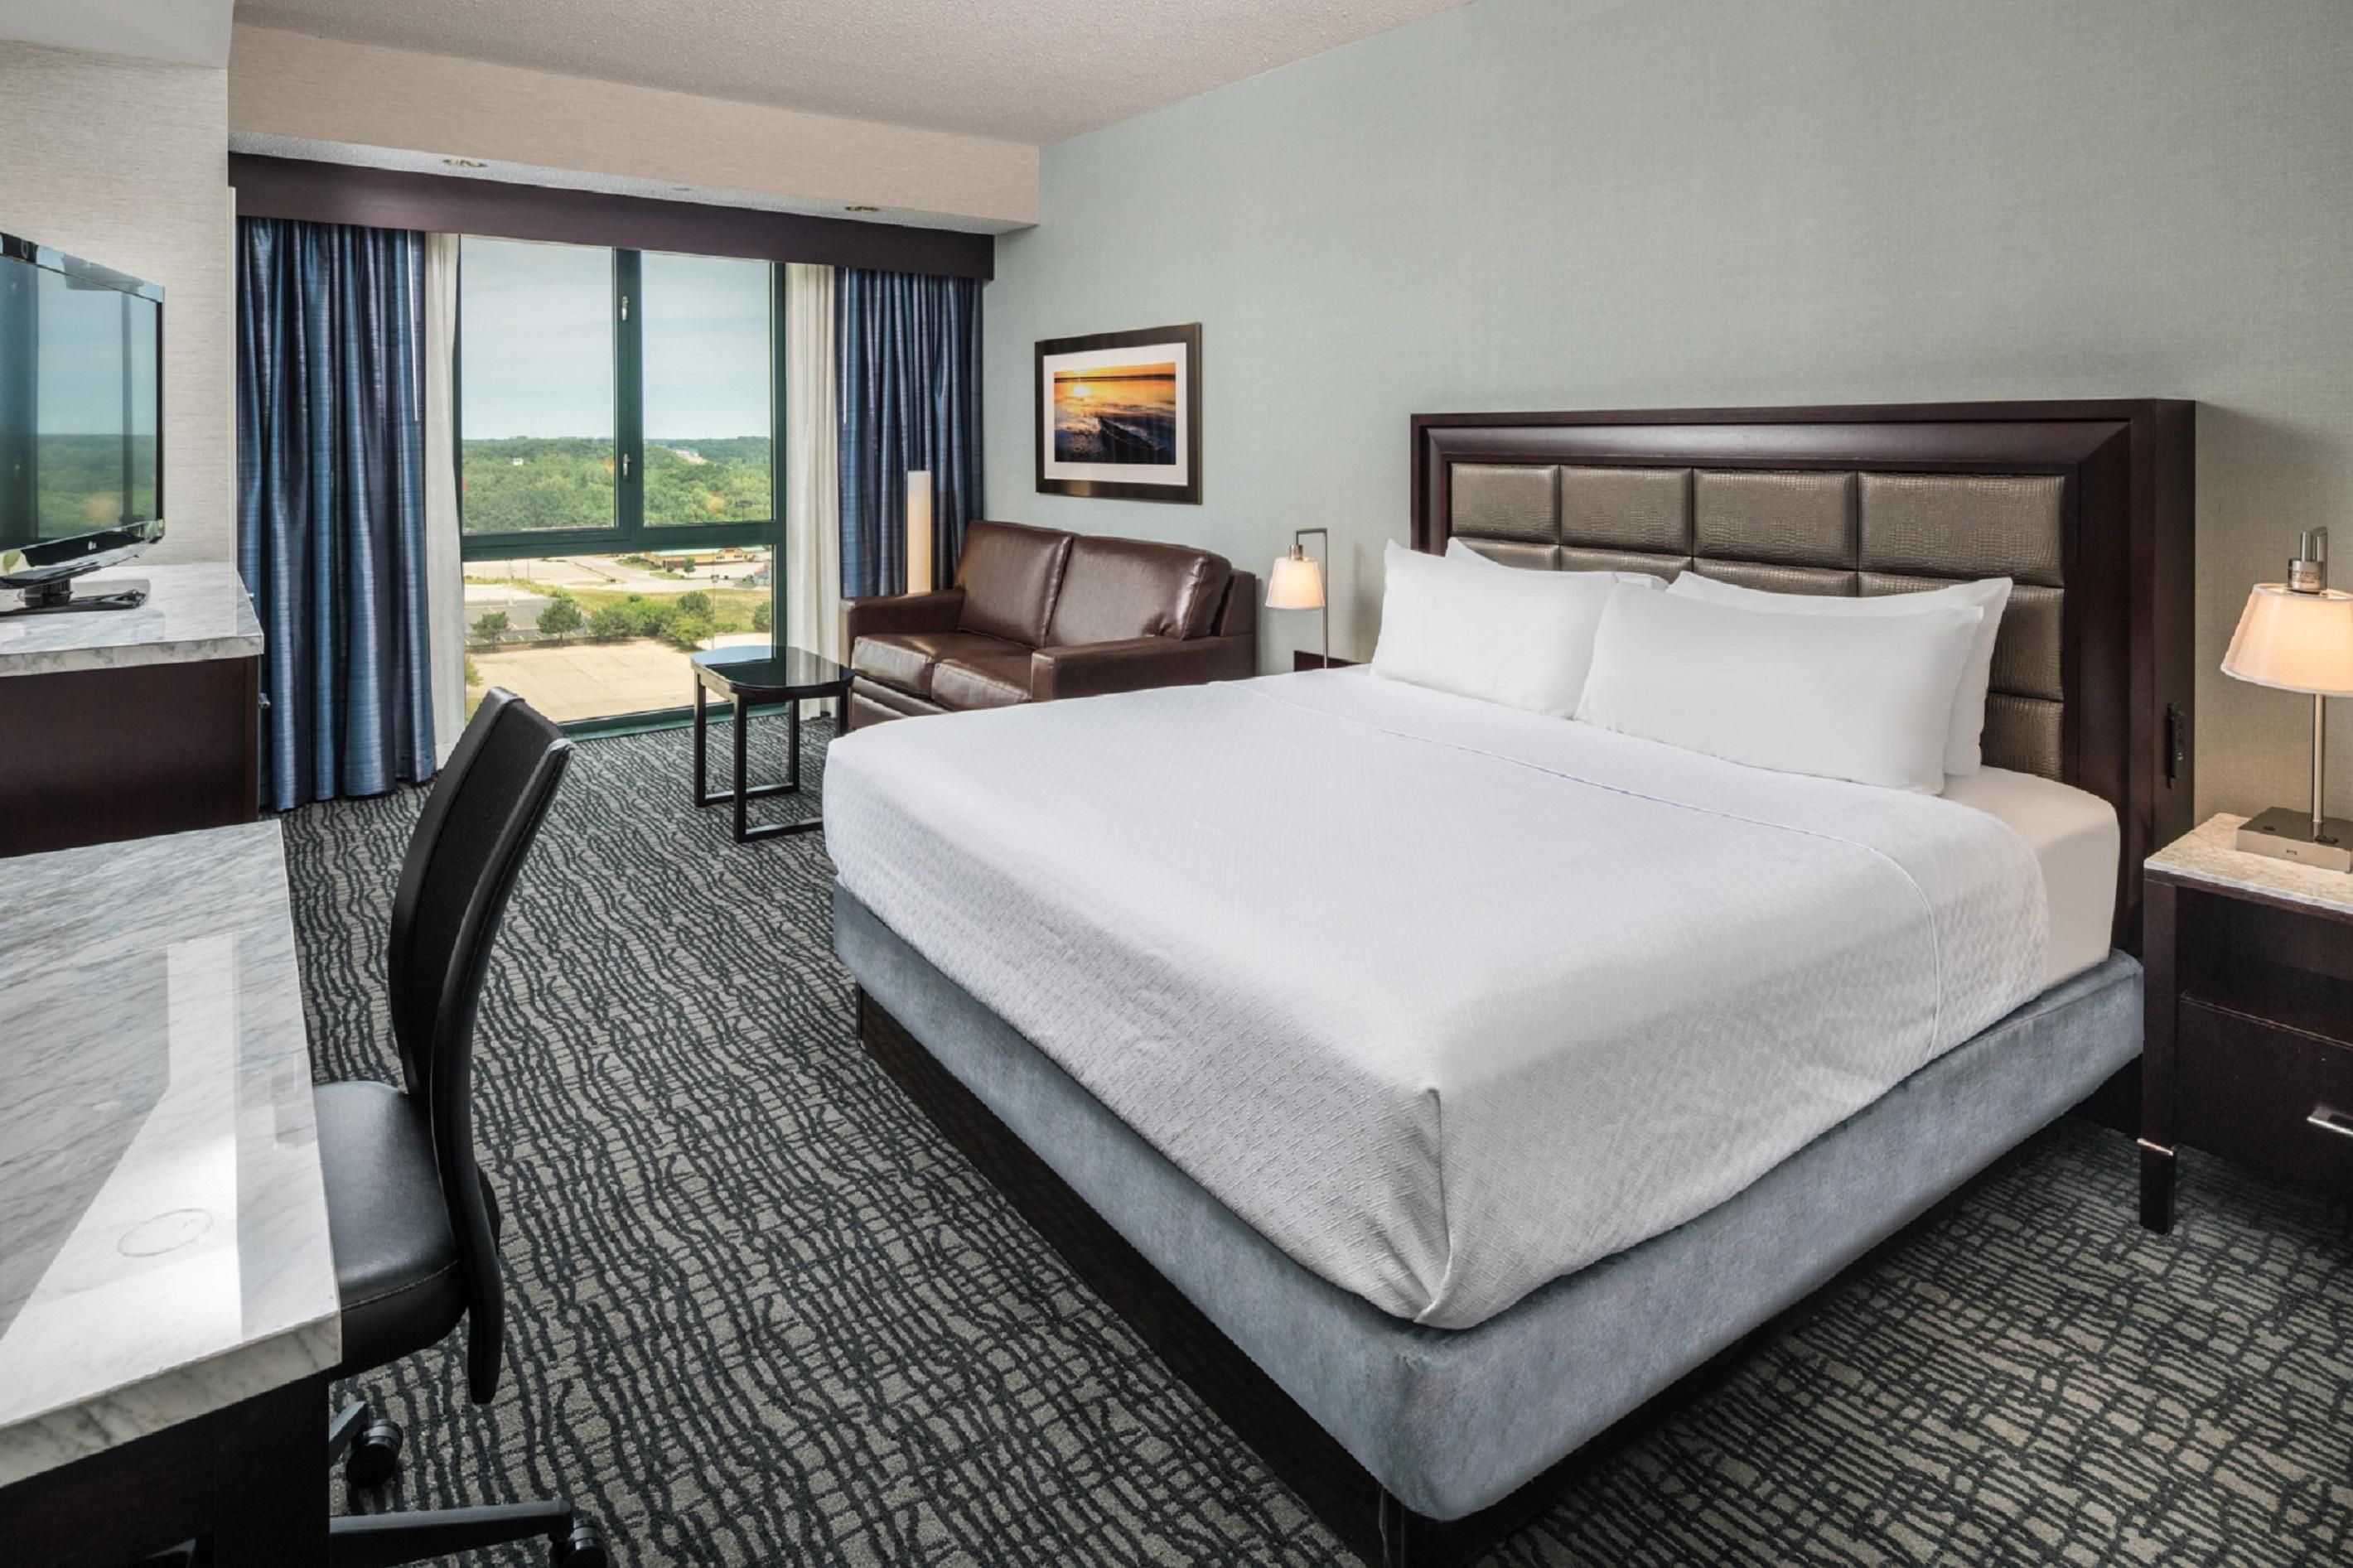 Spacious rooms are beautifully decorated and filled with comfort.